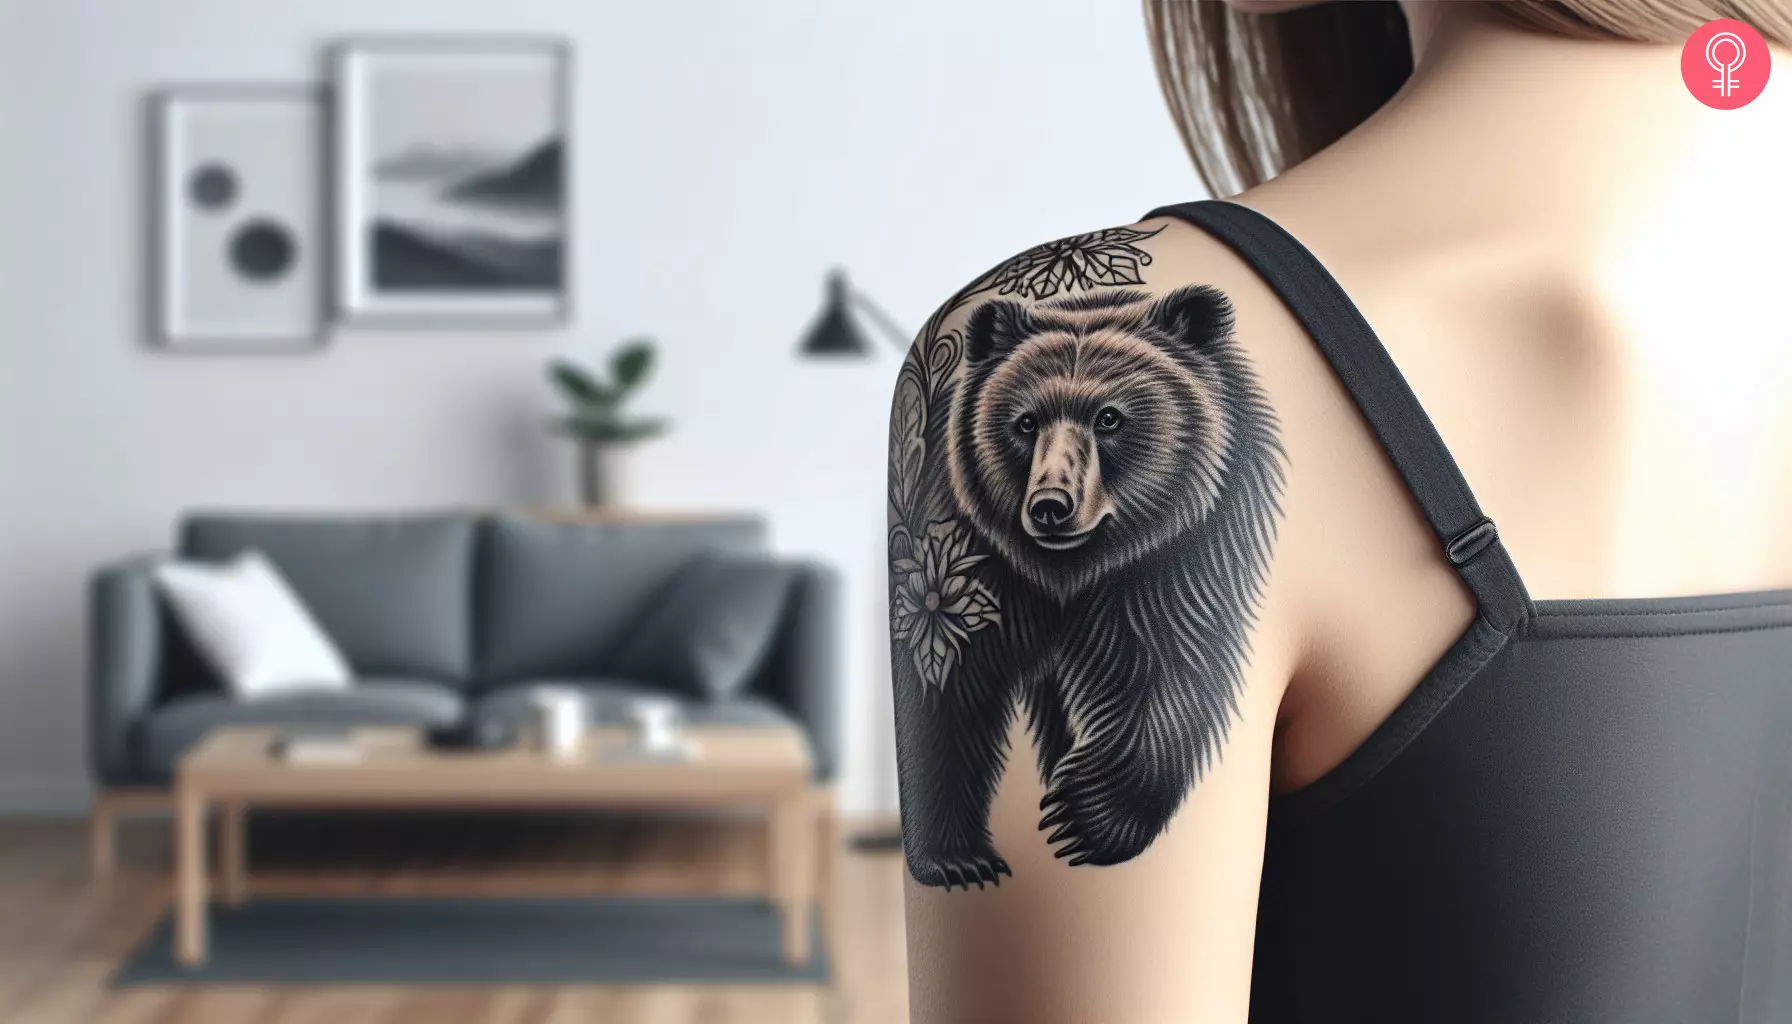 A realistic black bear tattoo on the back of the shoulder